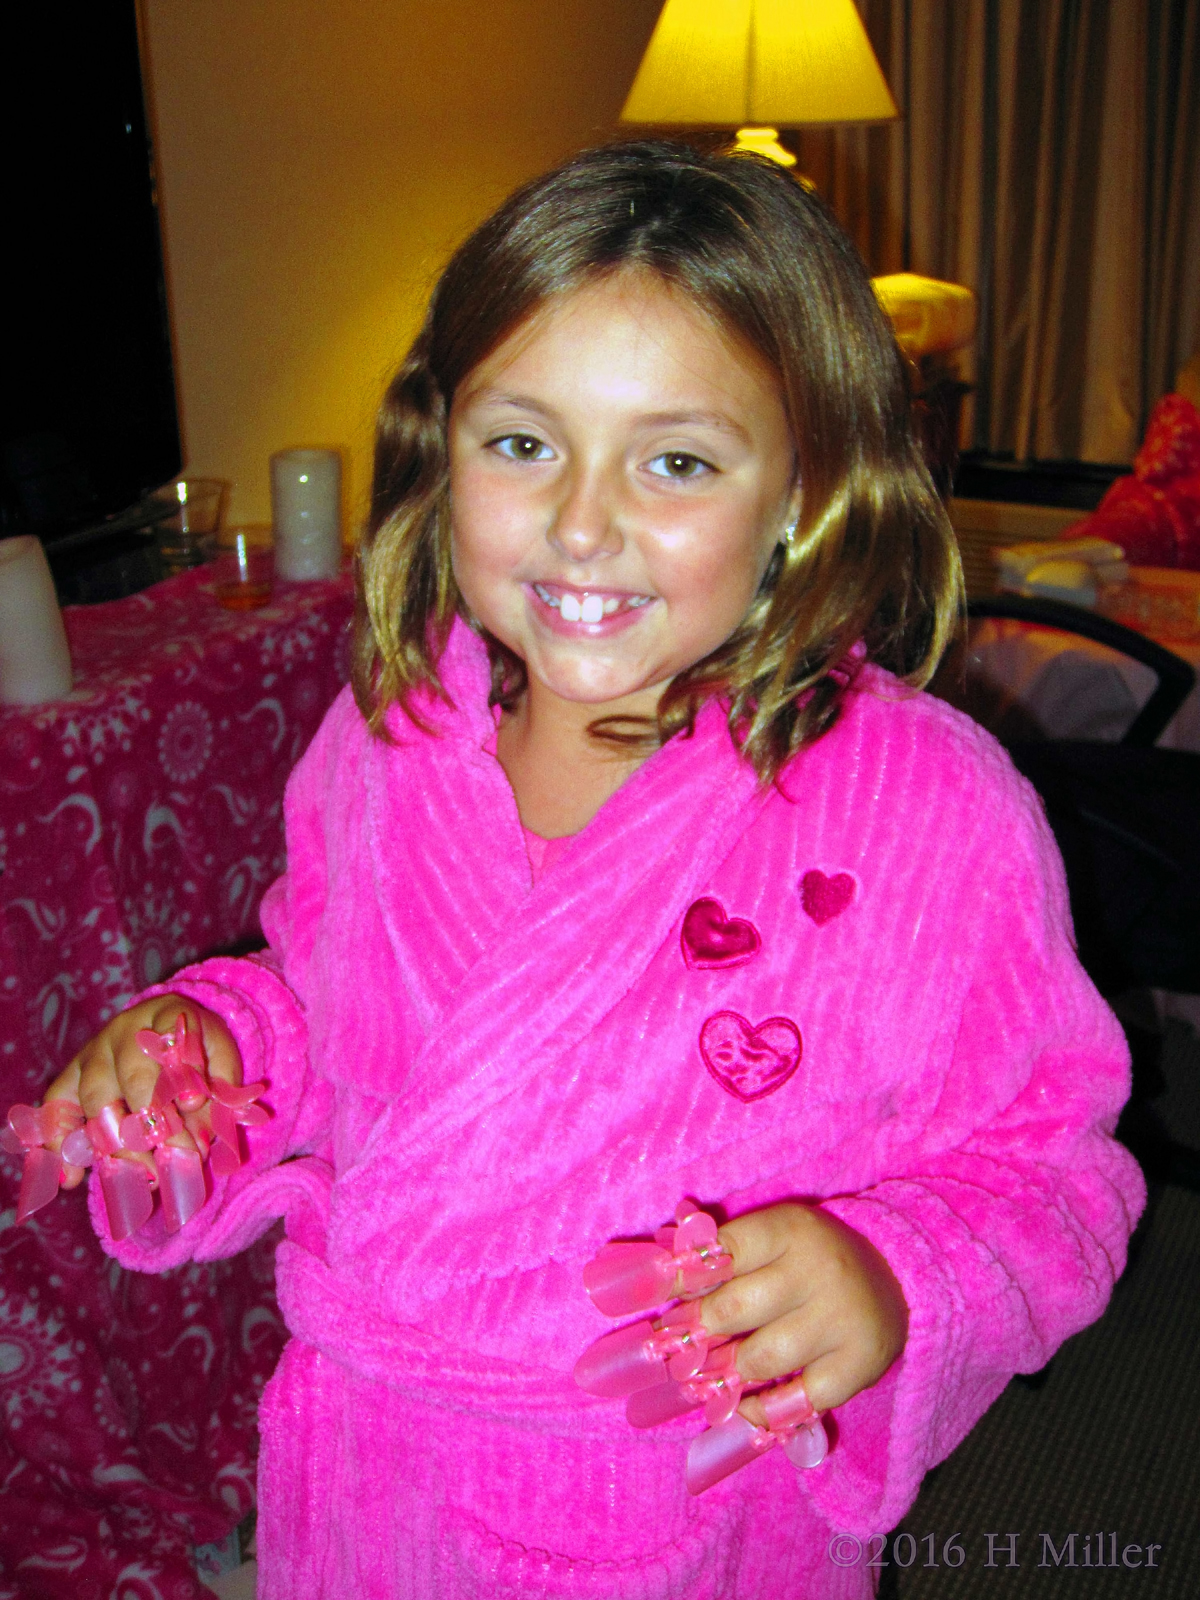 Smiling In Her Spa Robe And Manicure Protectors 